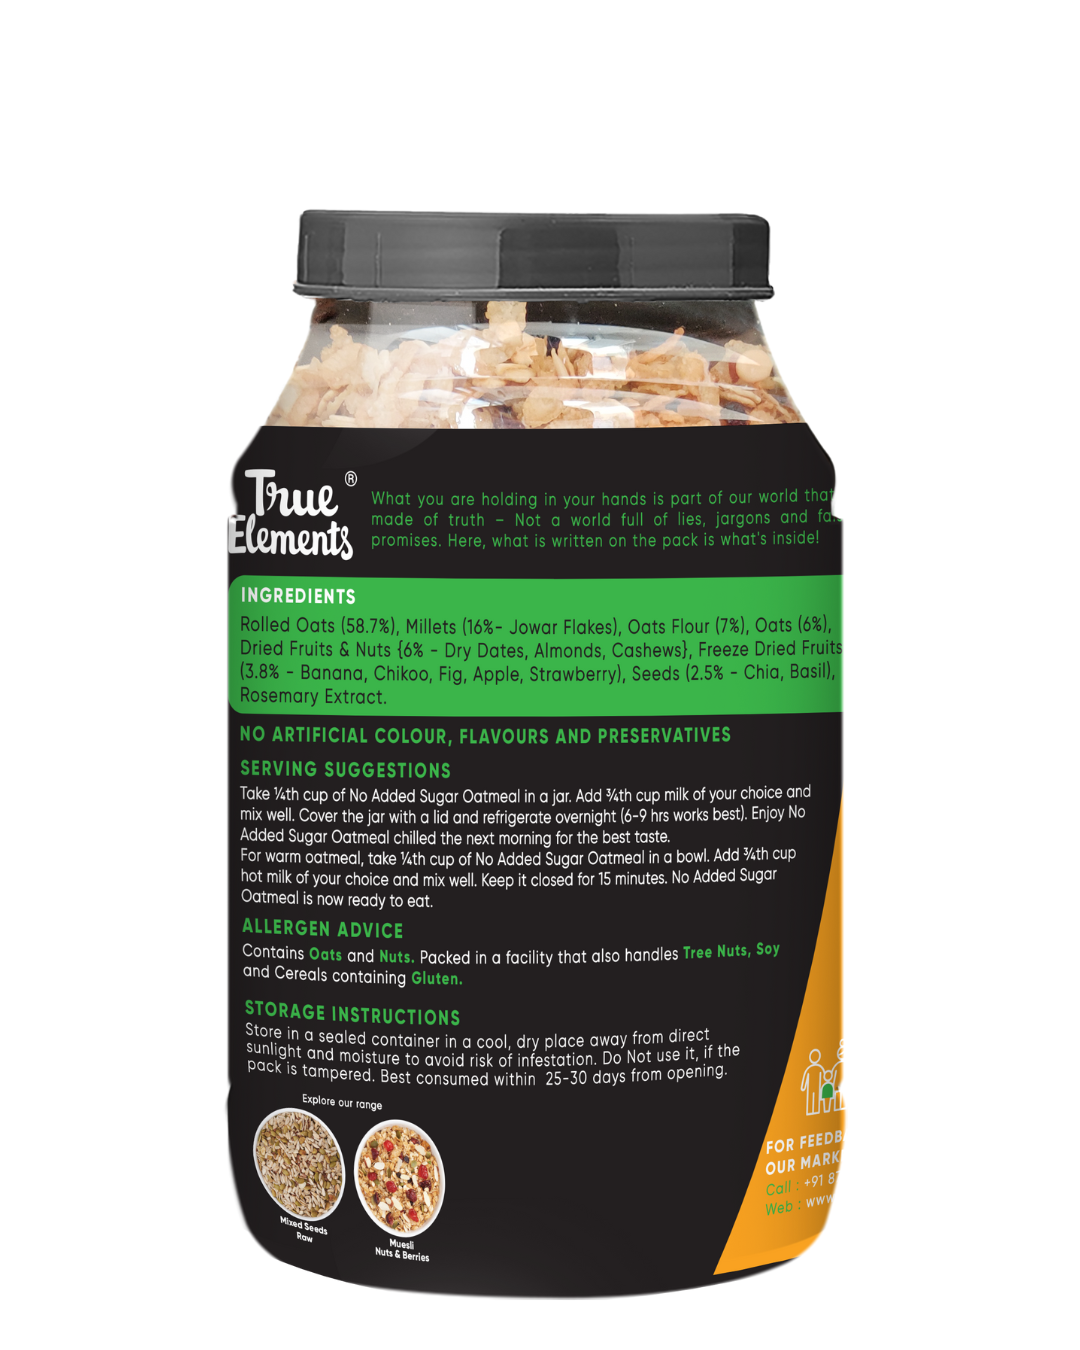 True elements no added sugar oatmeal ingredients and nutrients.